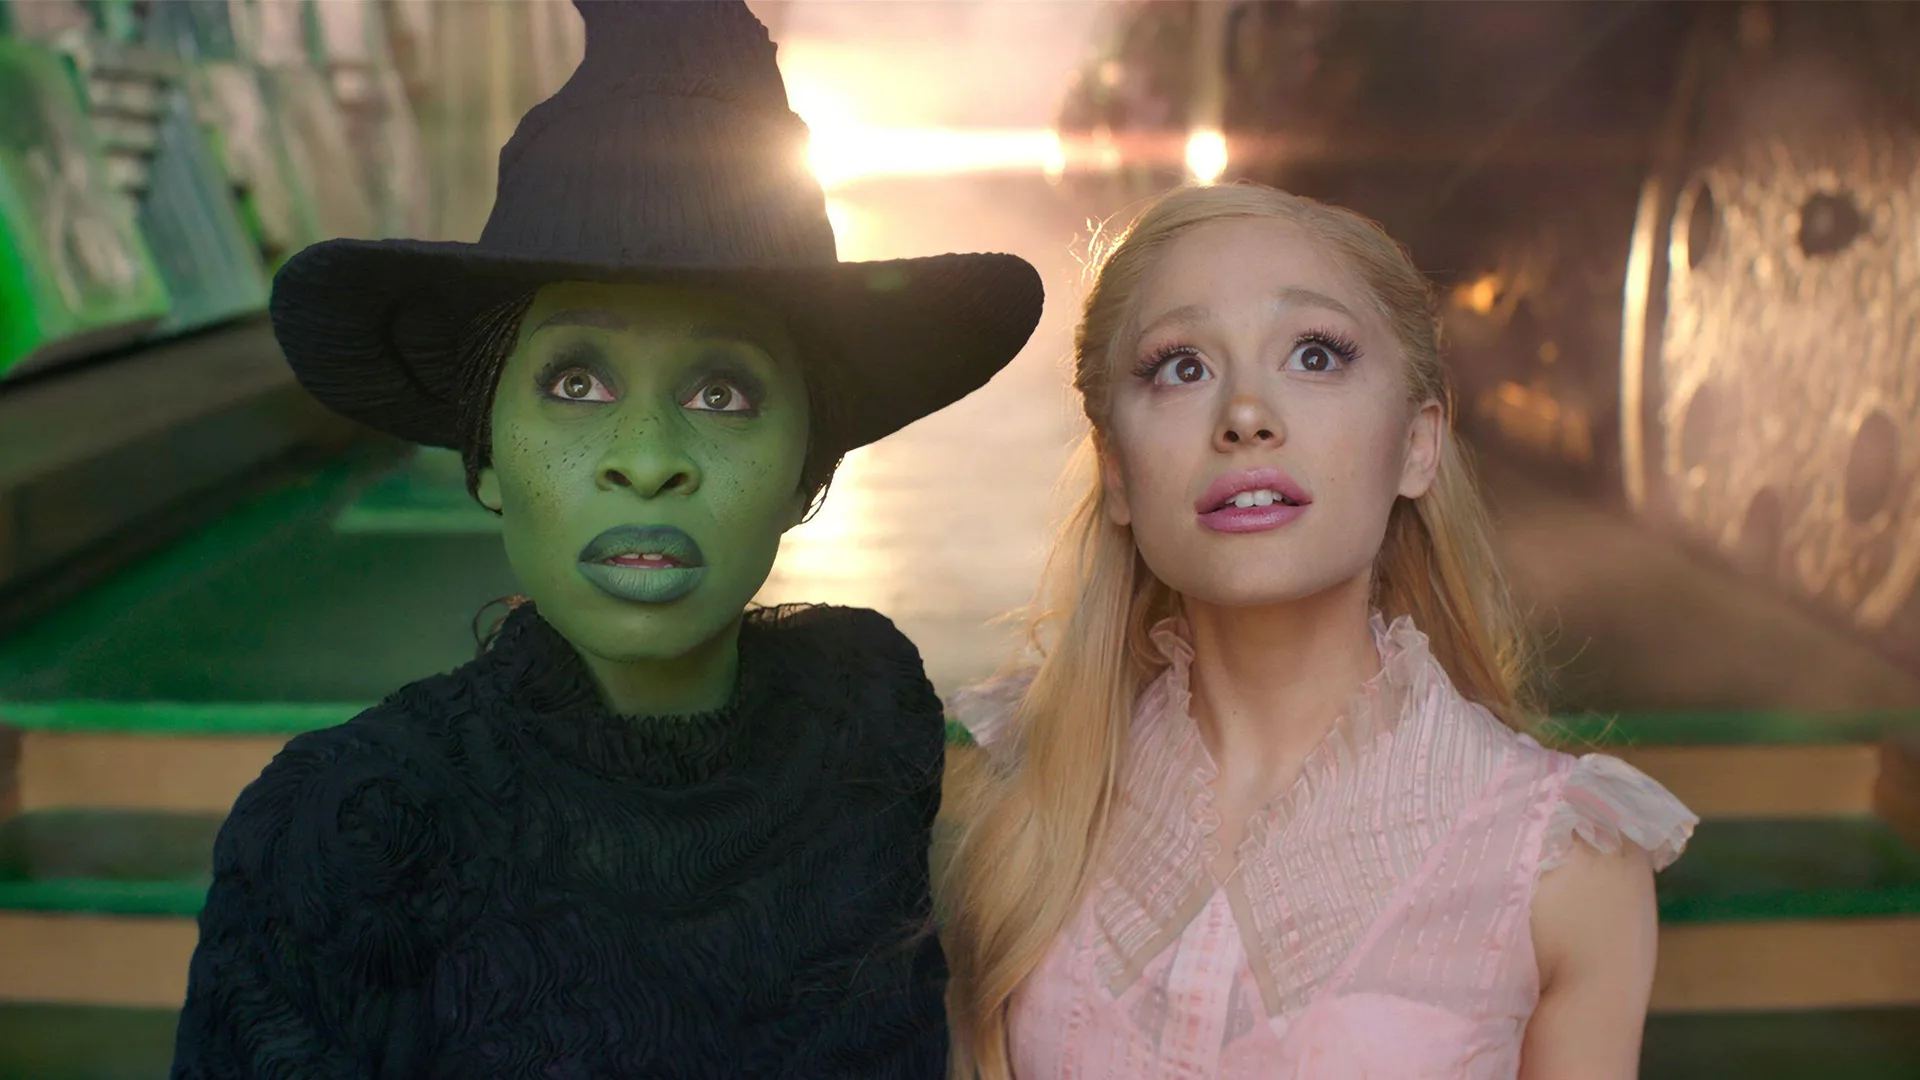 A still of the new Wicked film with Cynthia Erivo & Ariana Grande in costume as Elphaba and Glinda